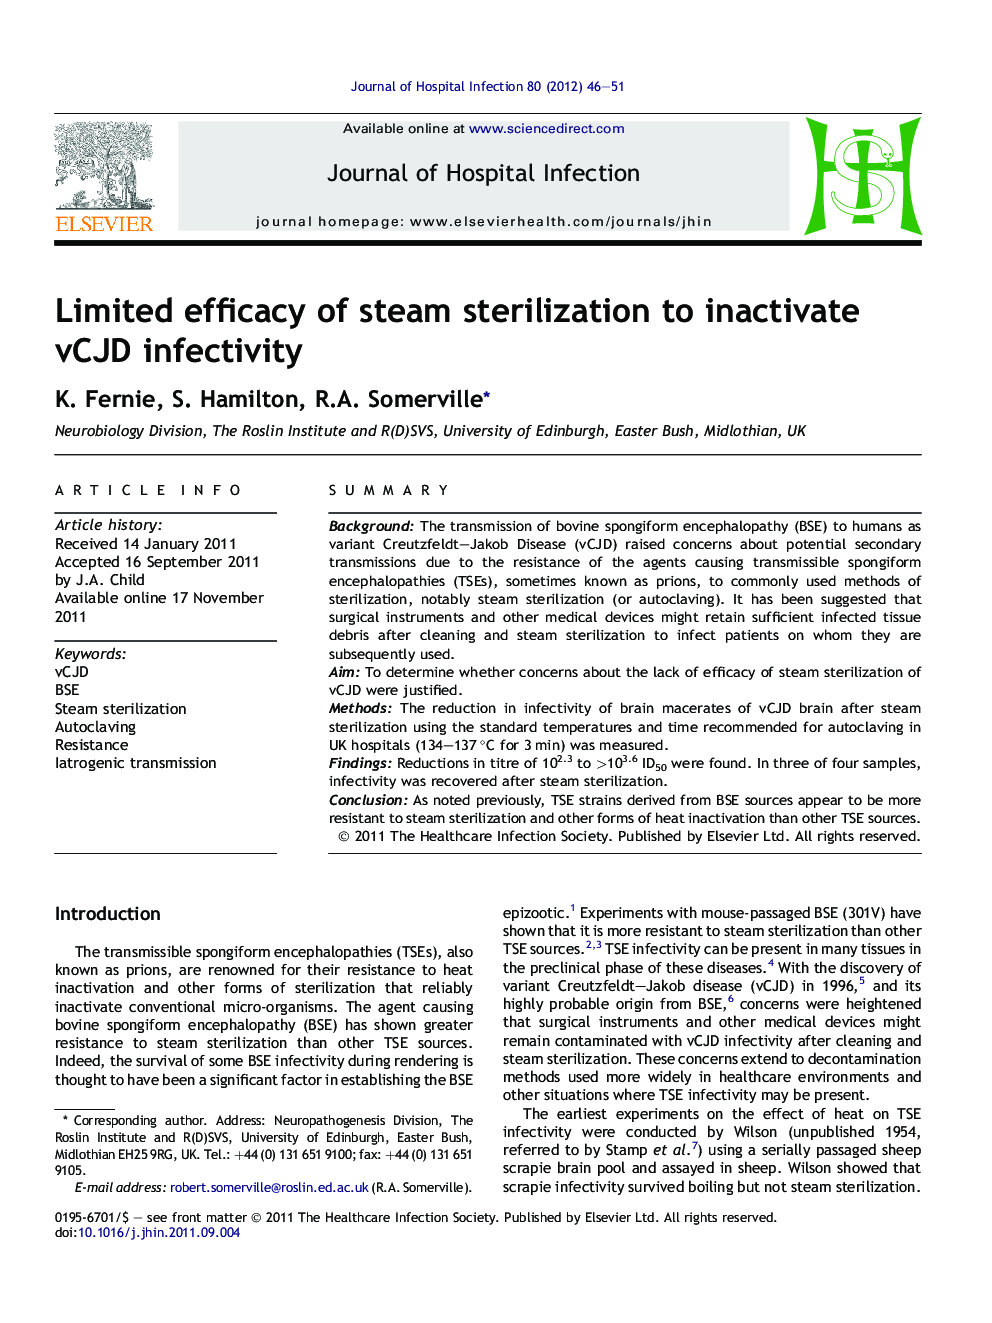 Limited efficacy of steam sterilization to inactivate vCJD infectivity